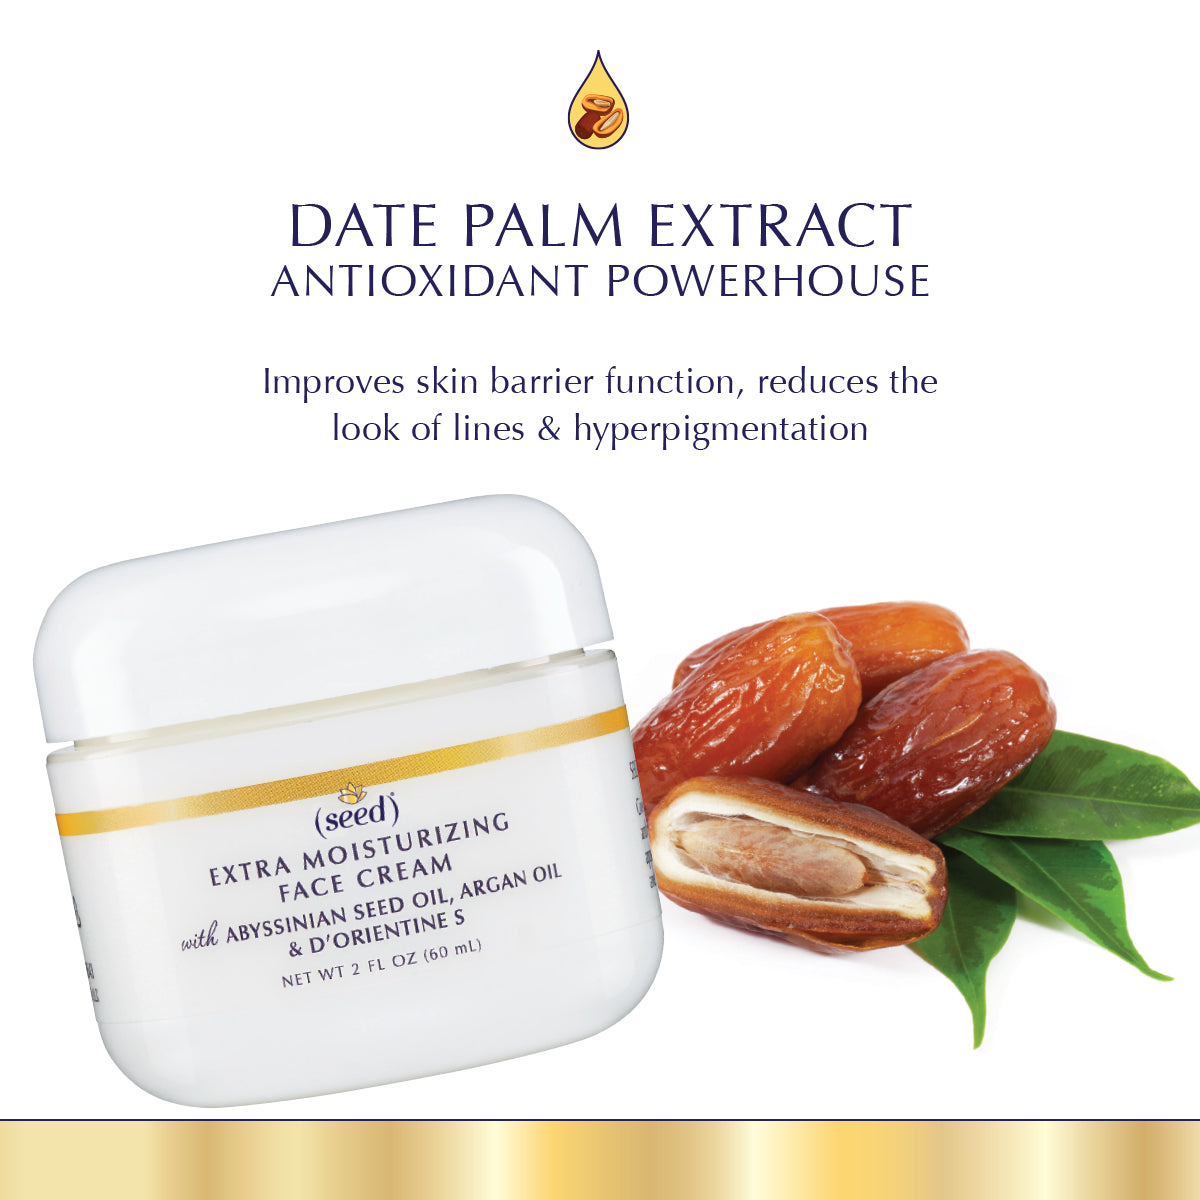 Seed Advanced Botanicals Extra Moisturizing Face Cream features Date Palm Extract